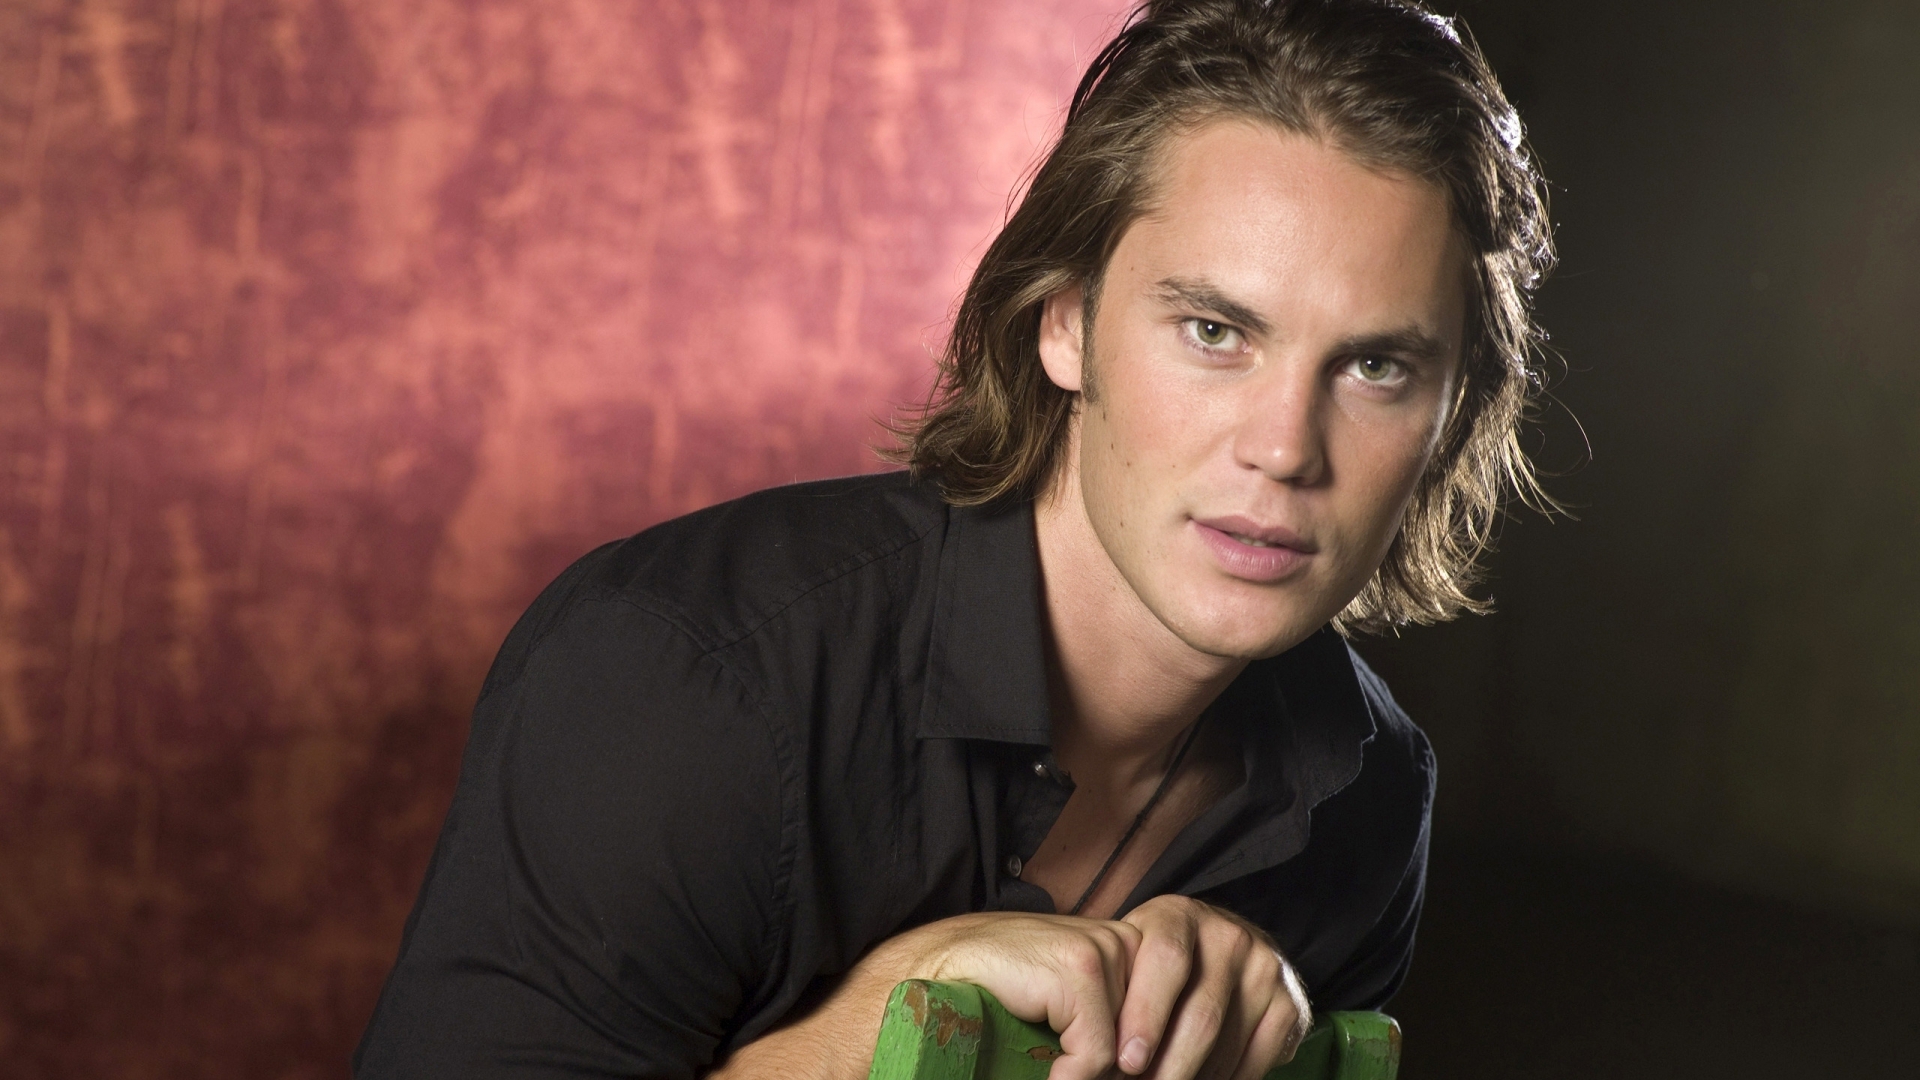 Taylor Kitsch for 1920 x 1080 HDTV 1080p resolution